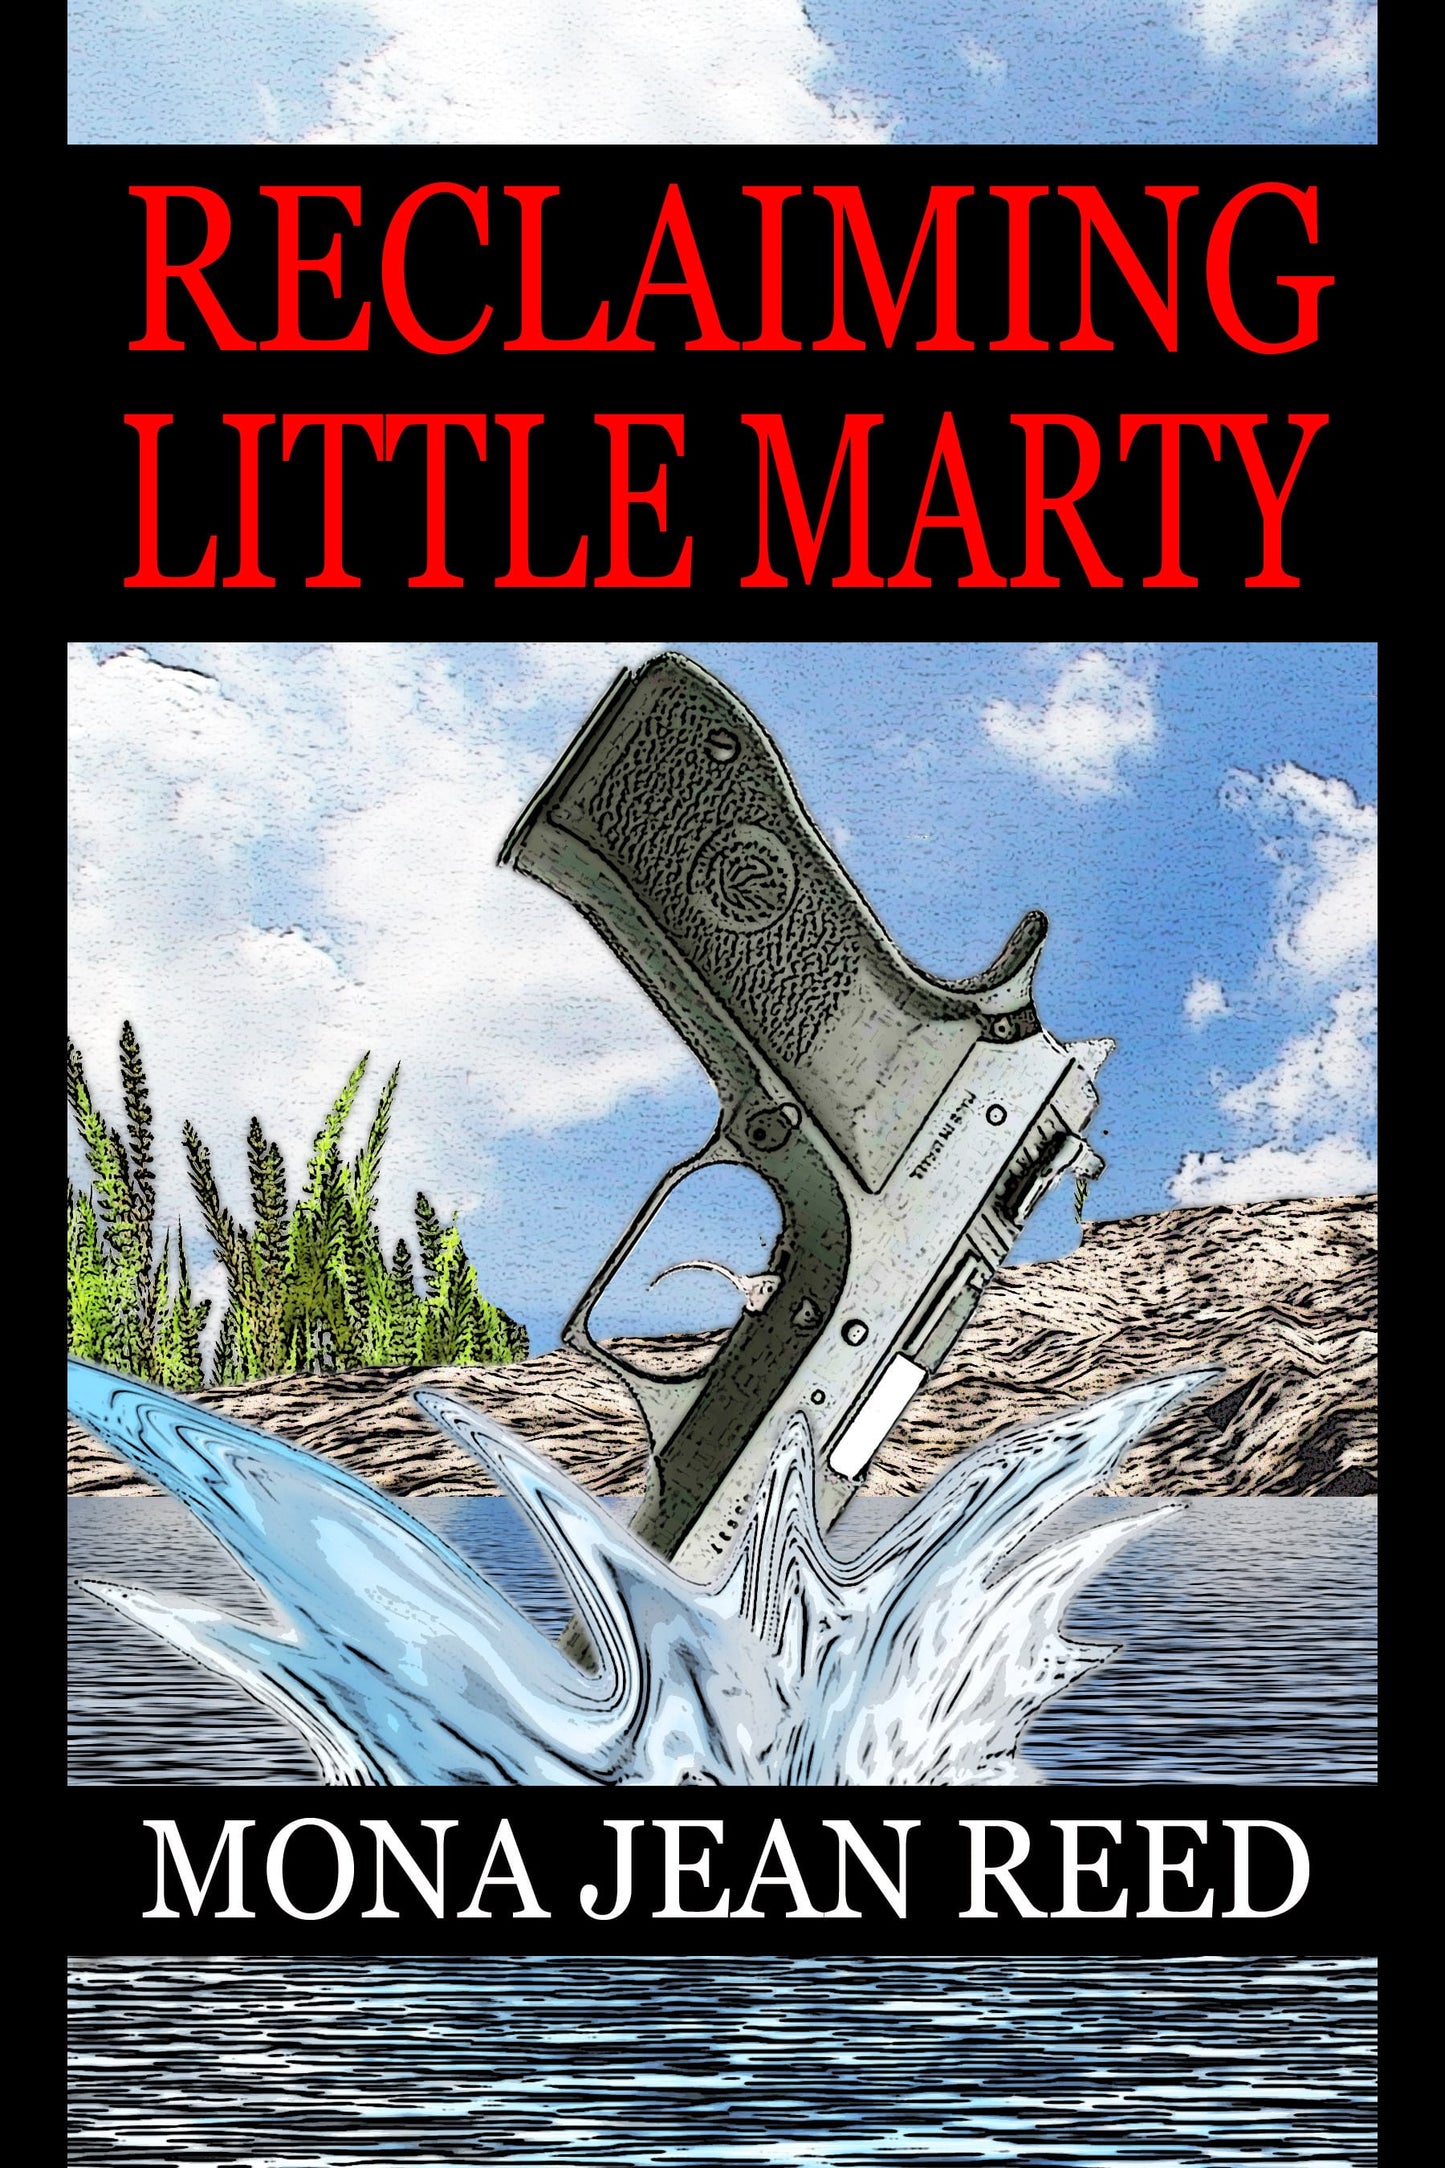 Reclaiming Little Marty